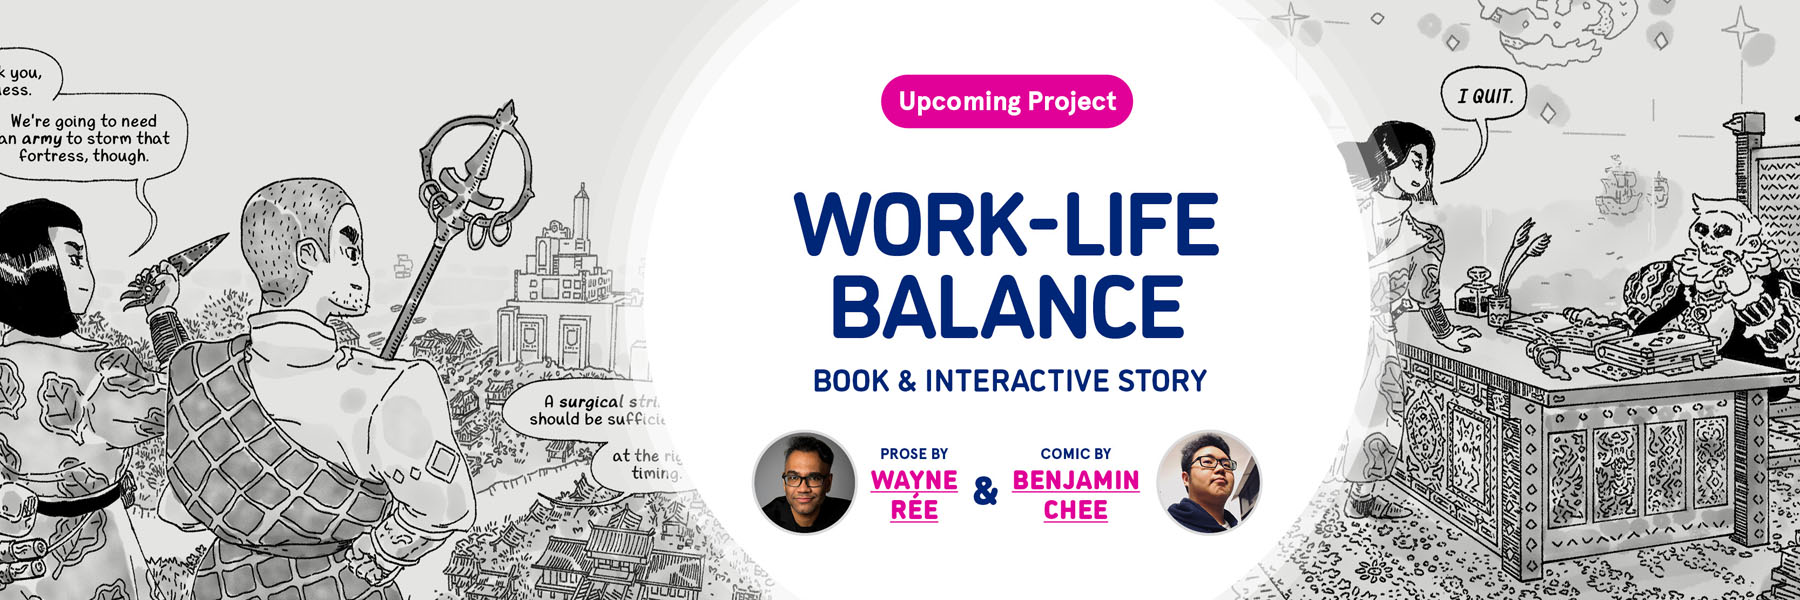 Upcoming Project for Work Life Balance